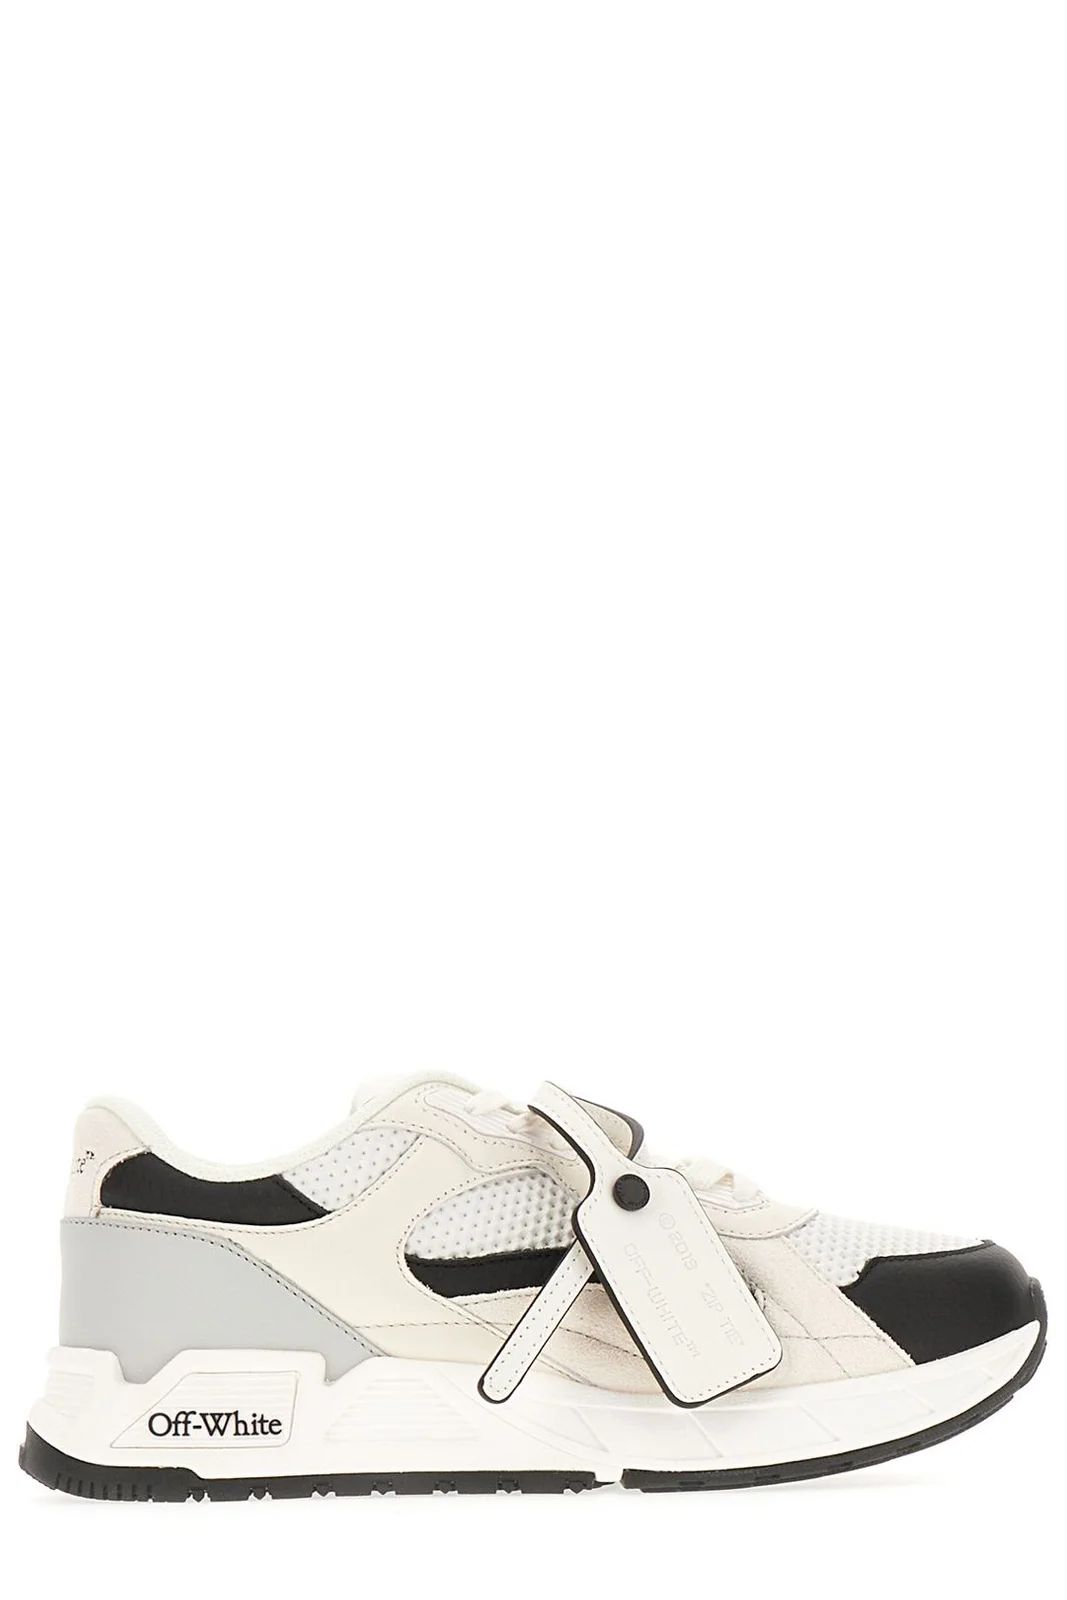 Off-White Kick Off Lace-Up Sneakers | Cettire Global